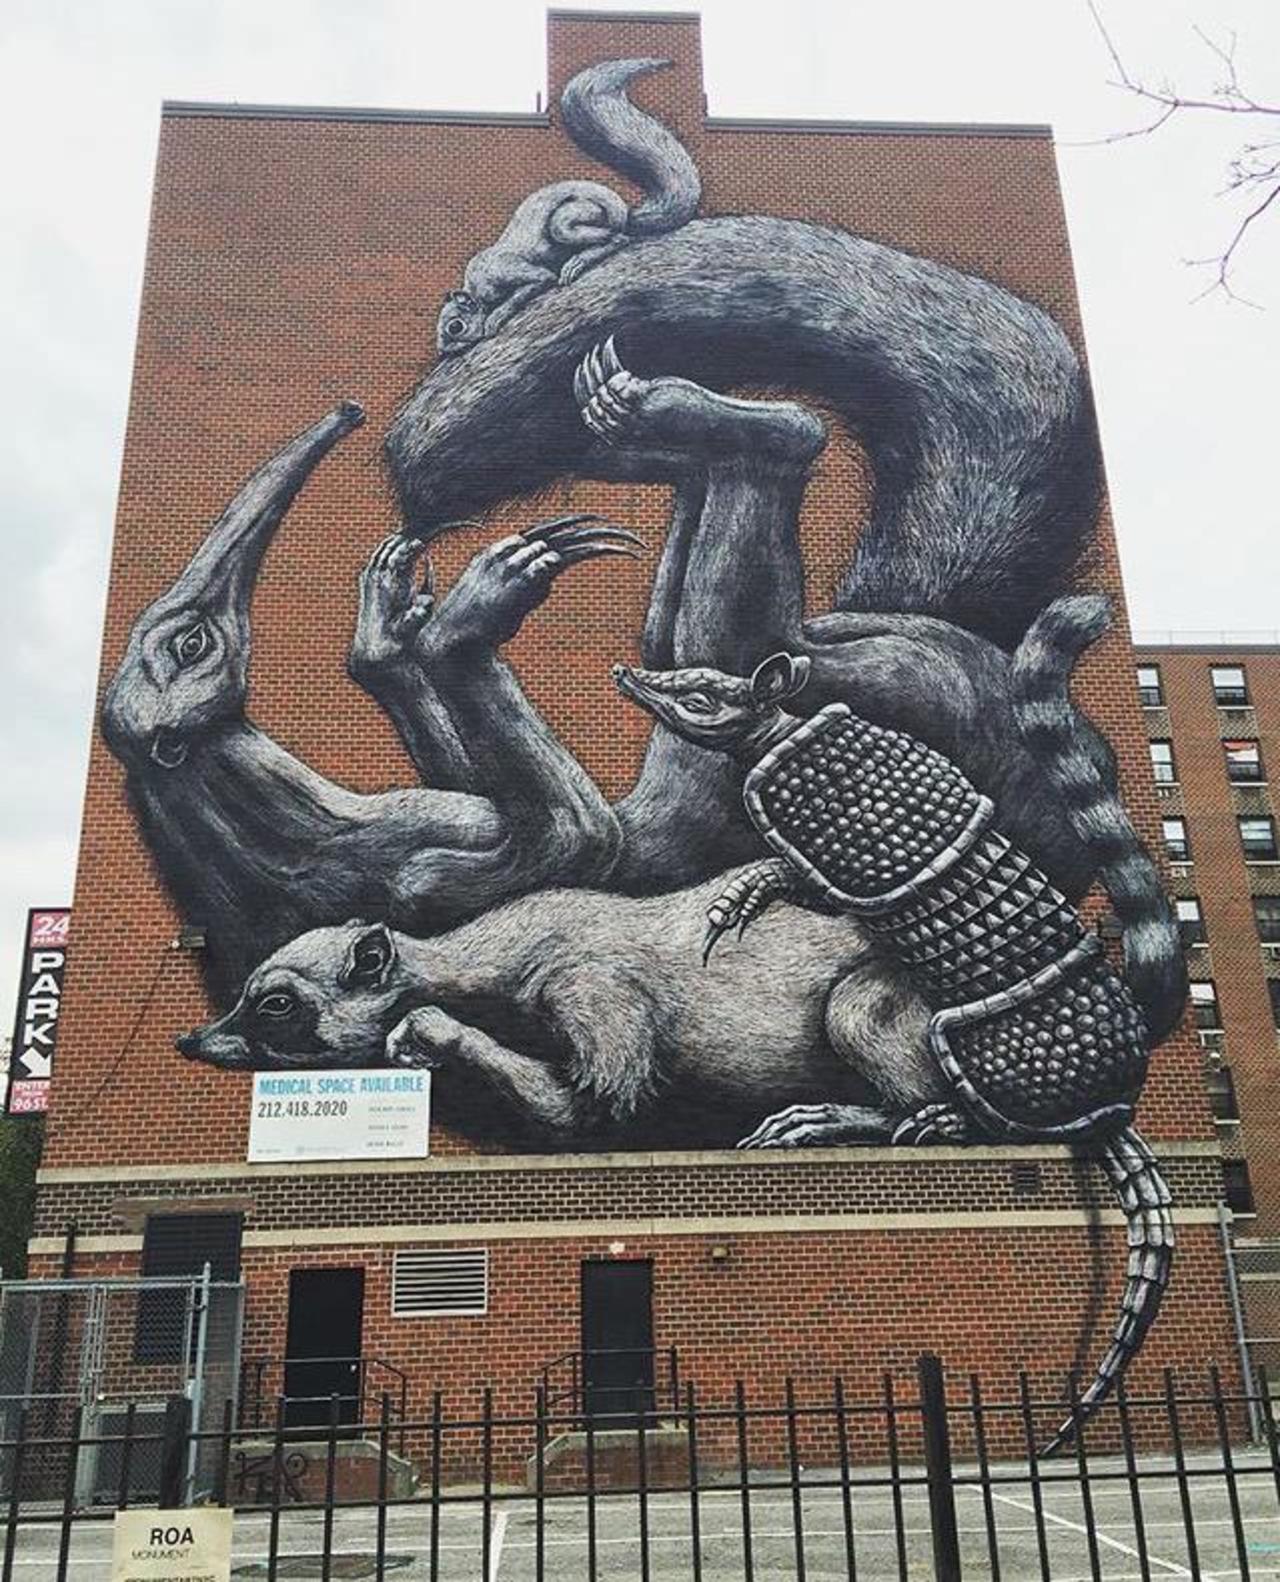 The completed new large scale Street Art wall by ROA in NYC

#art #graffiti #mural #streetart http://t.co/AcwWzcmjIP